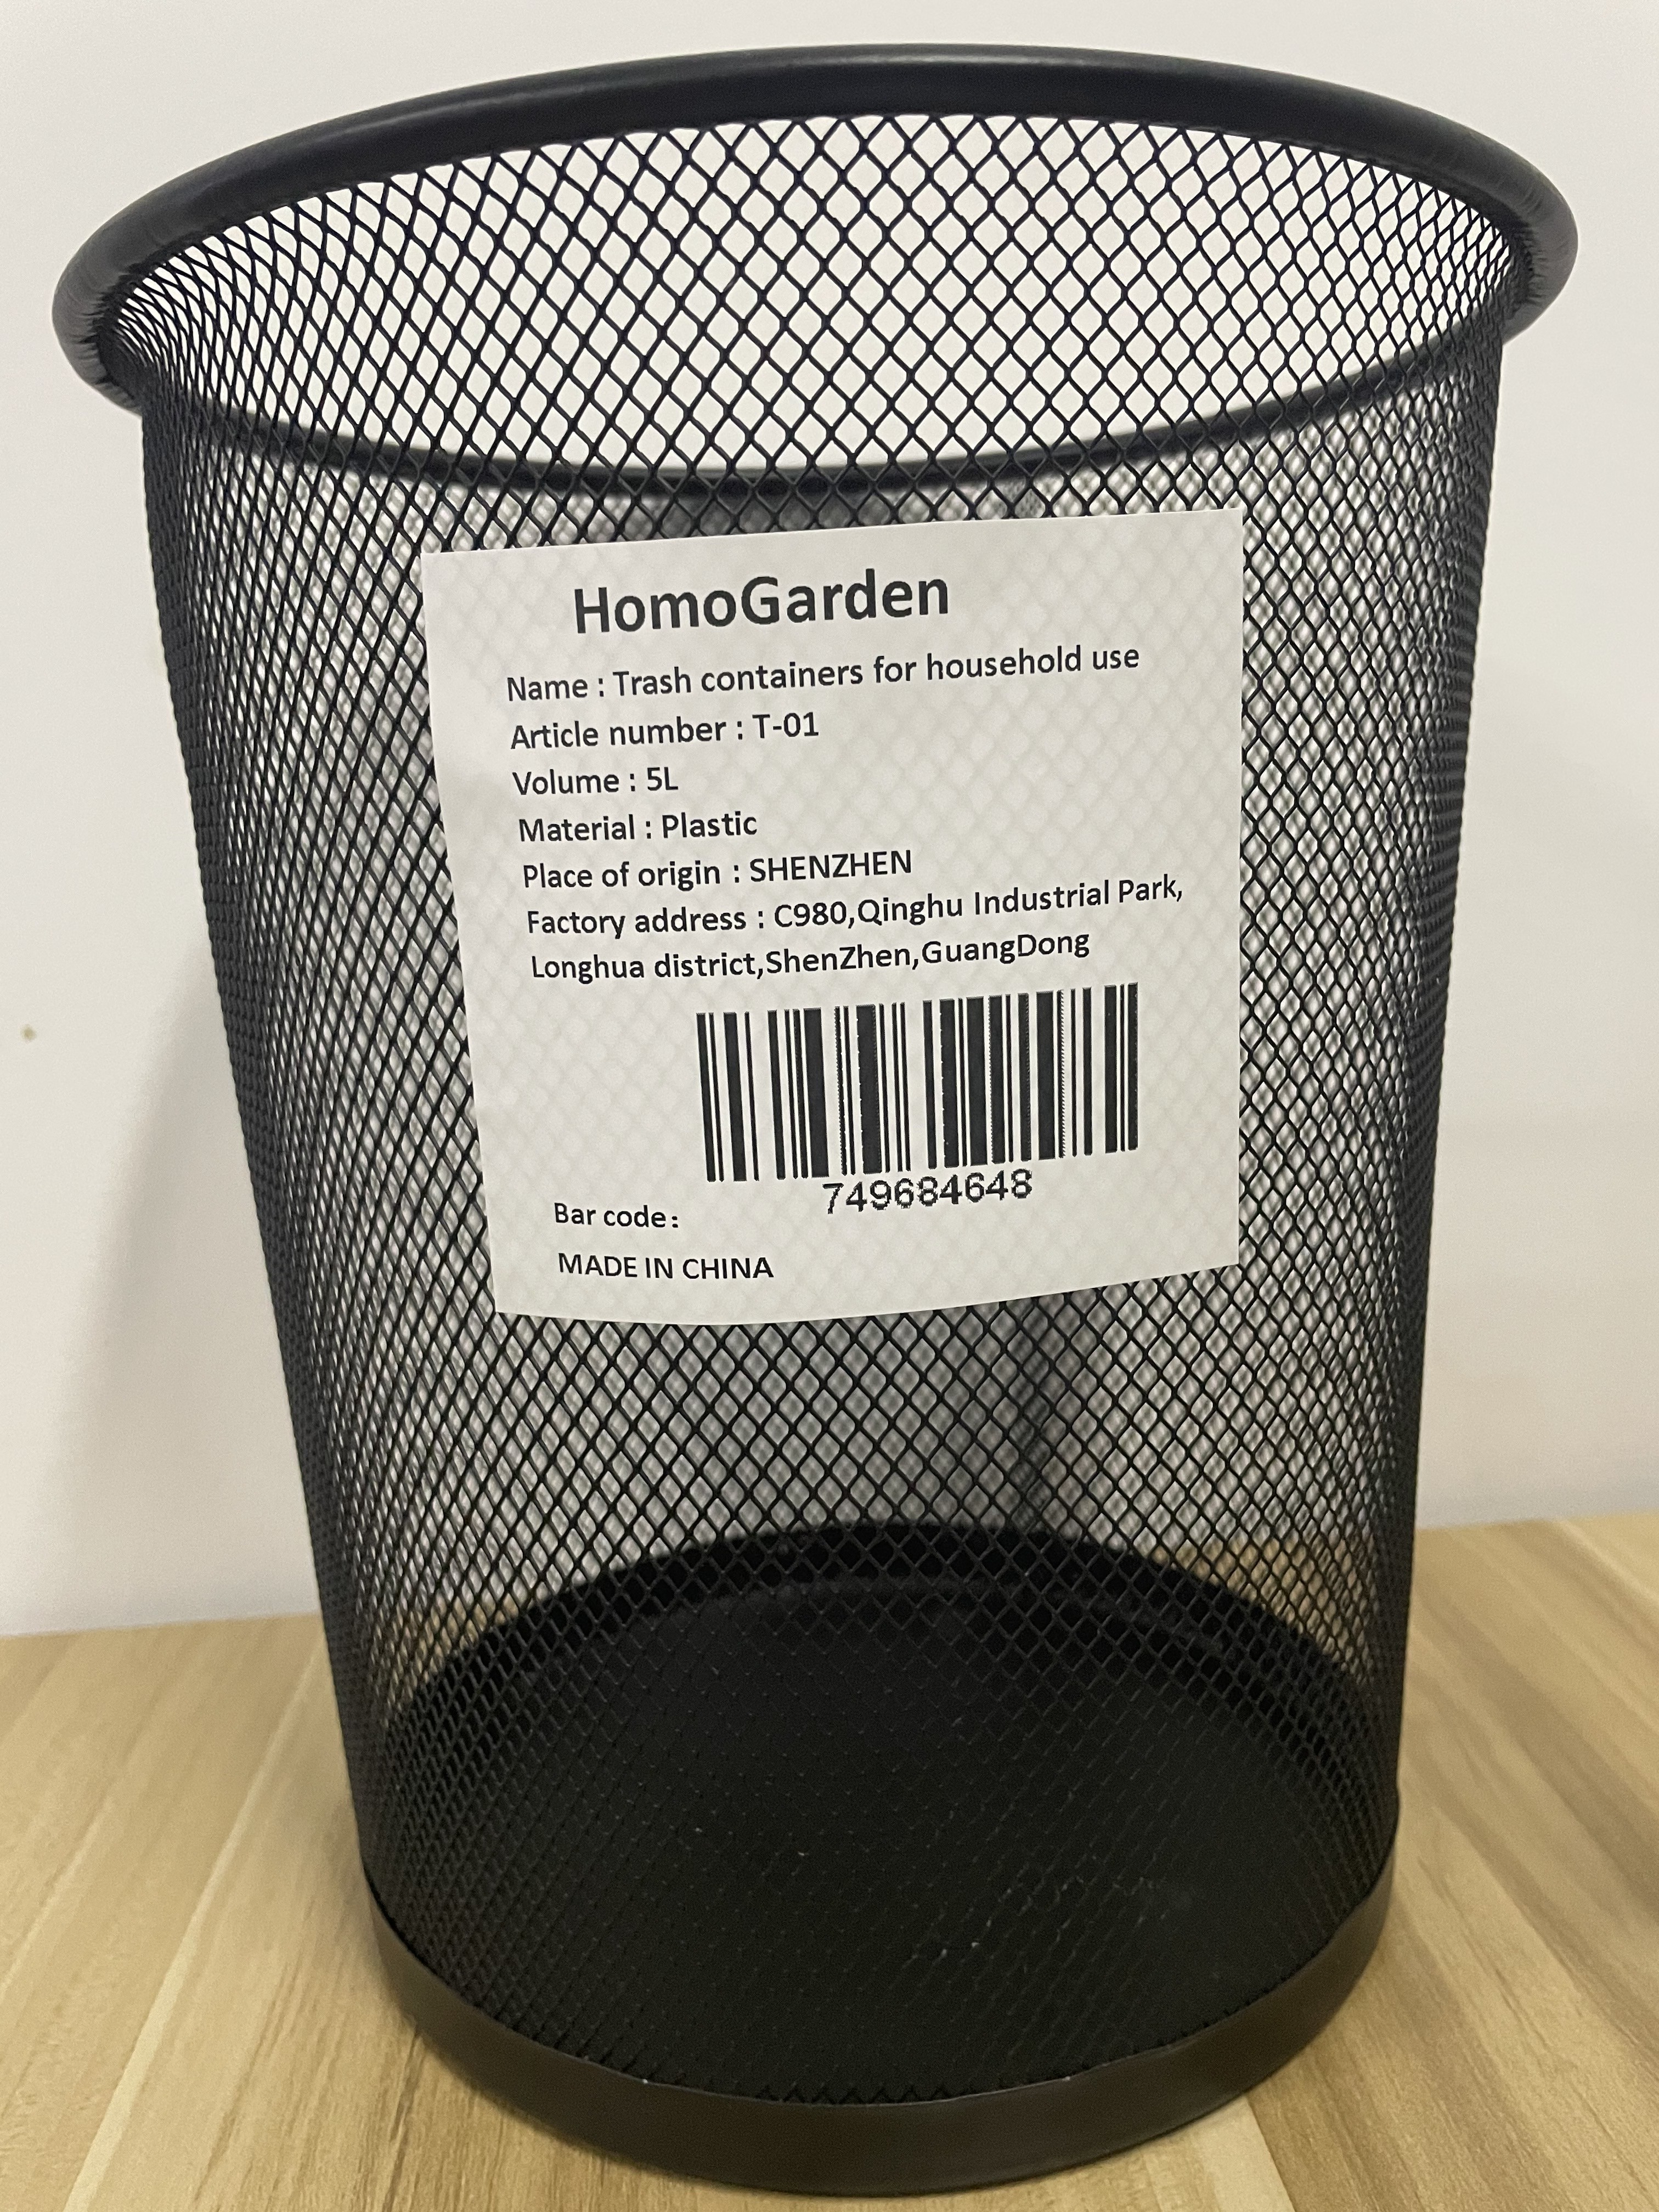 HomoGarden Trash Containers for Household Use, Round Mesh Wastebasket Trash Cans, 1.3 Gallon, Black